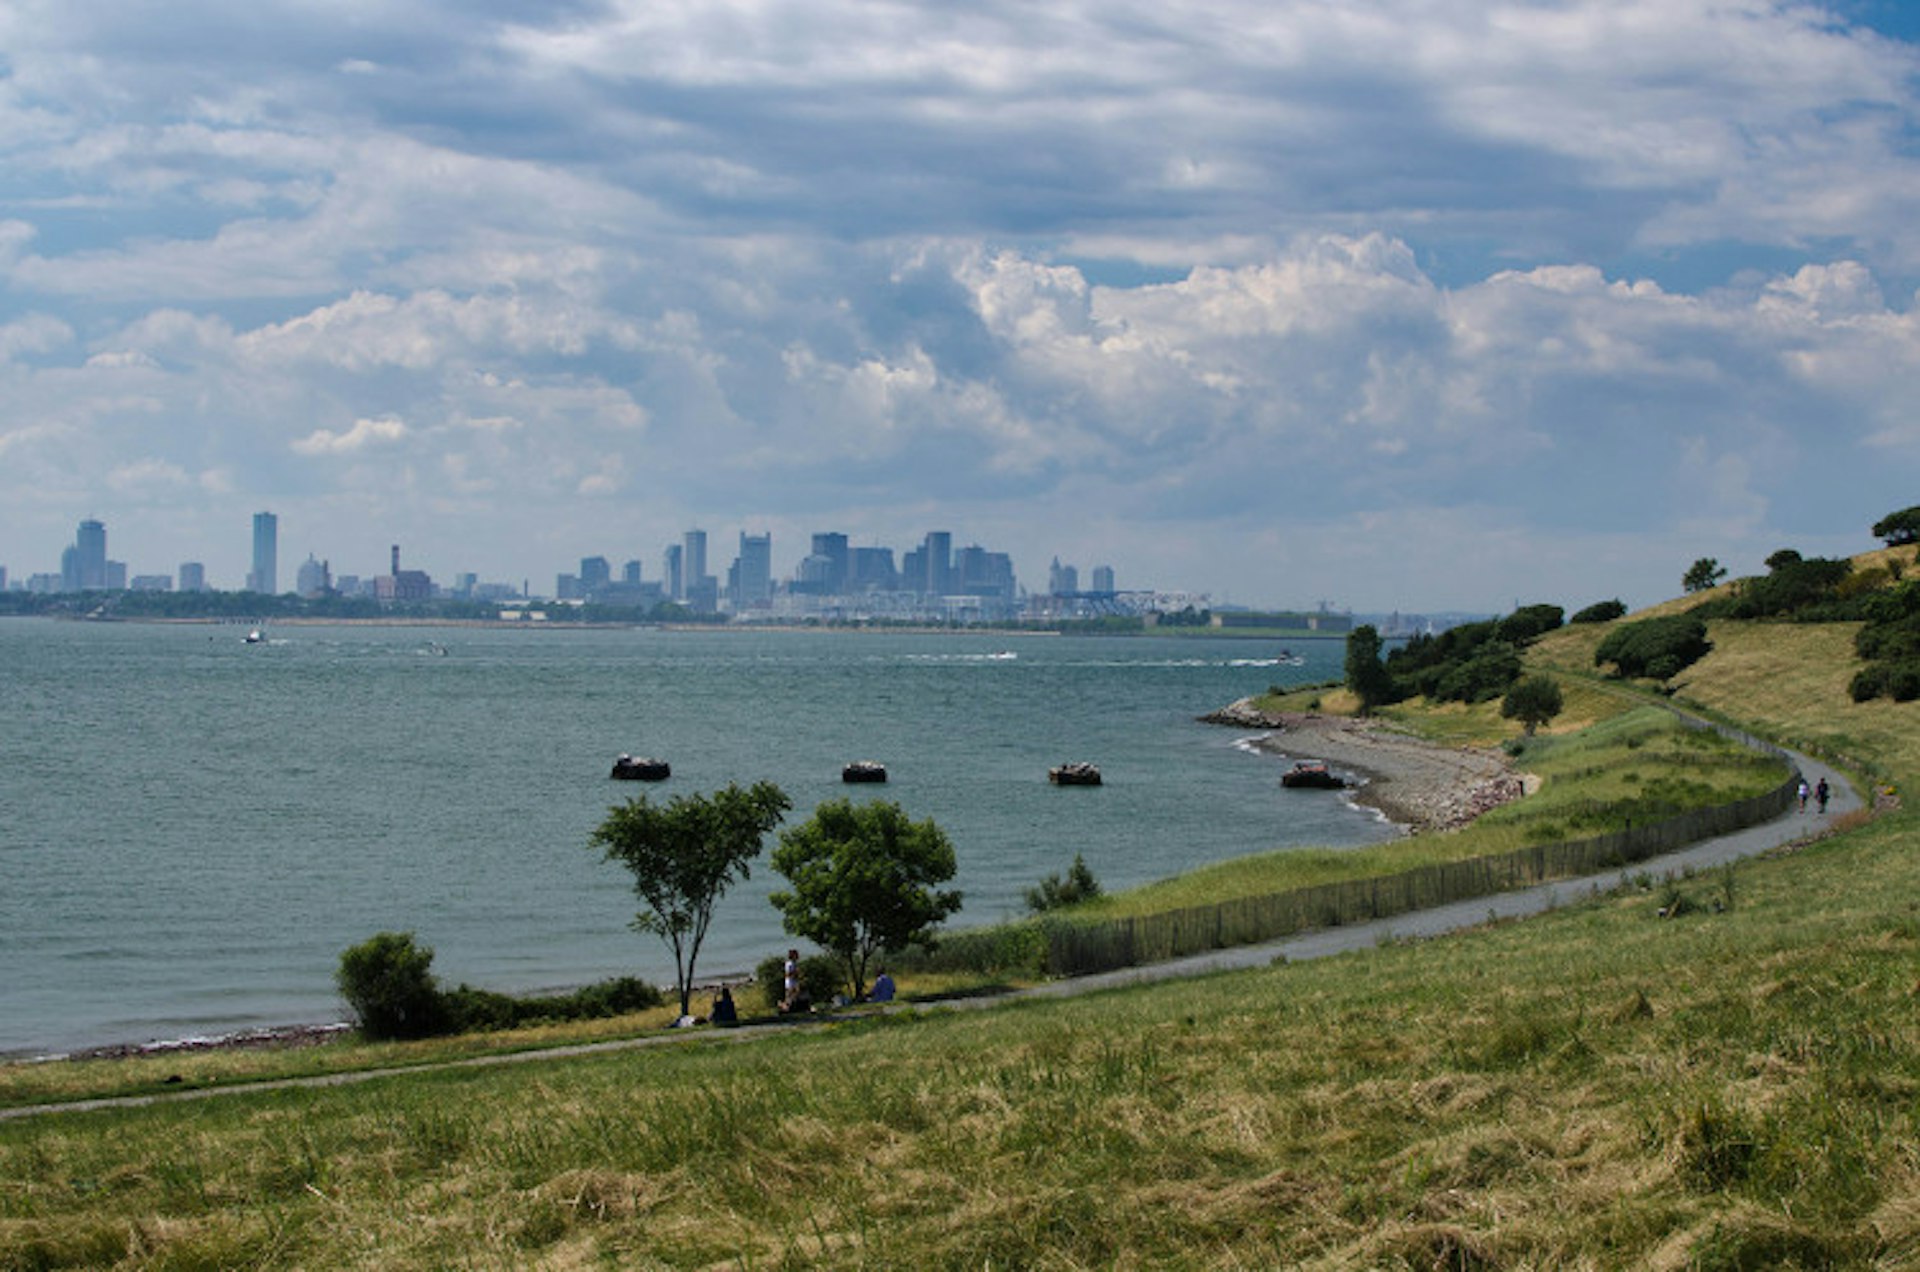 Hiking trail on Spectacle Island with view of the Boston harbor. Image by Scott Dexter / CC BY-SA 2.0